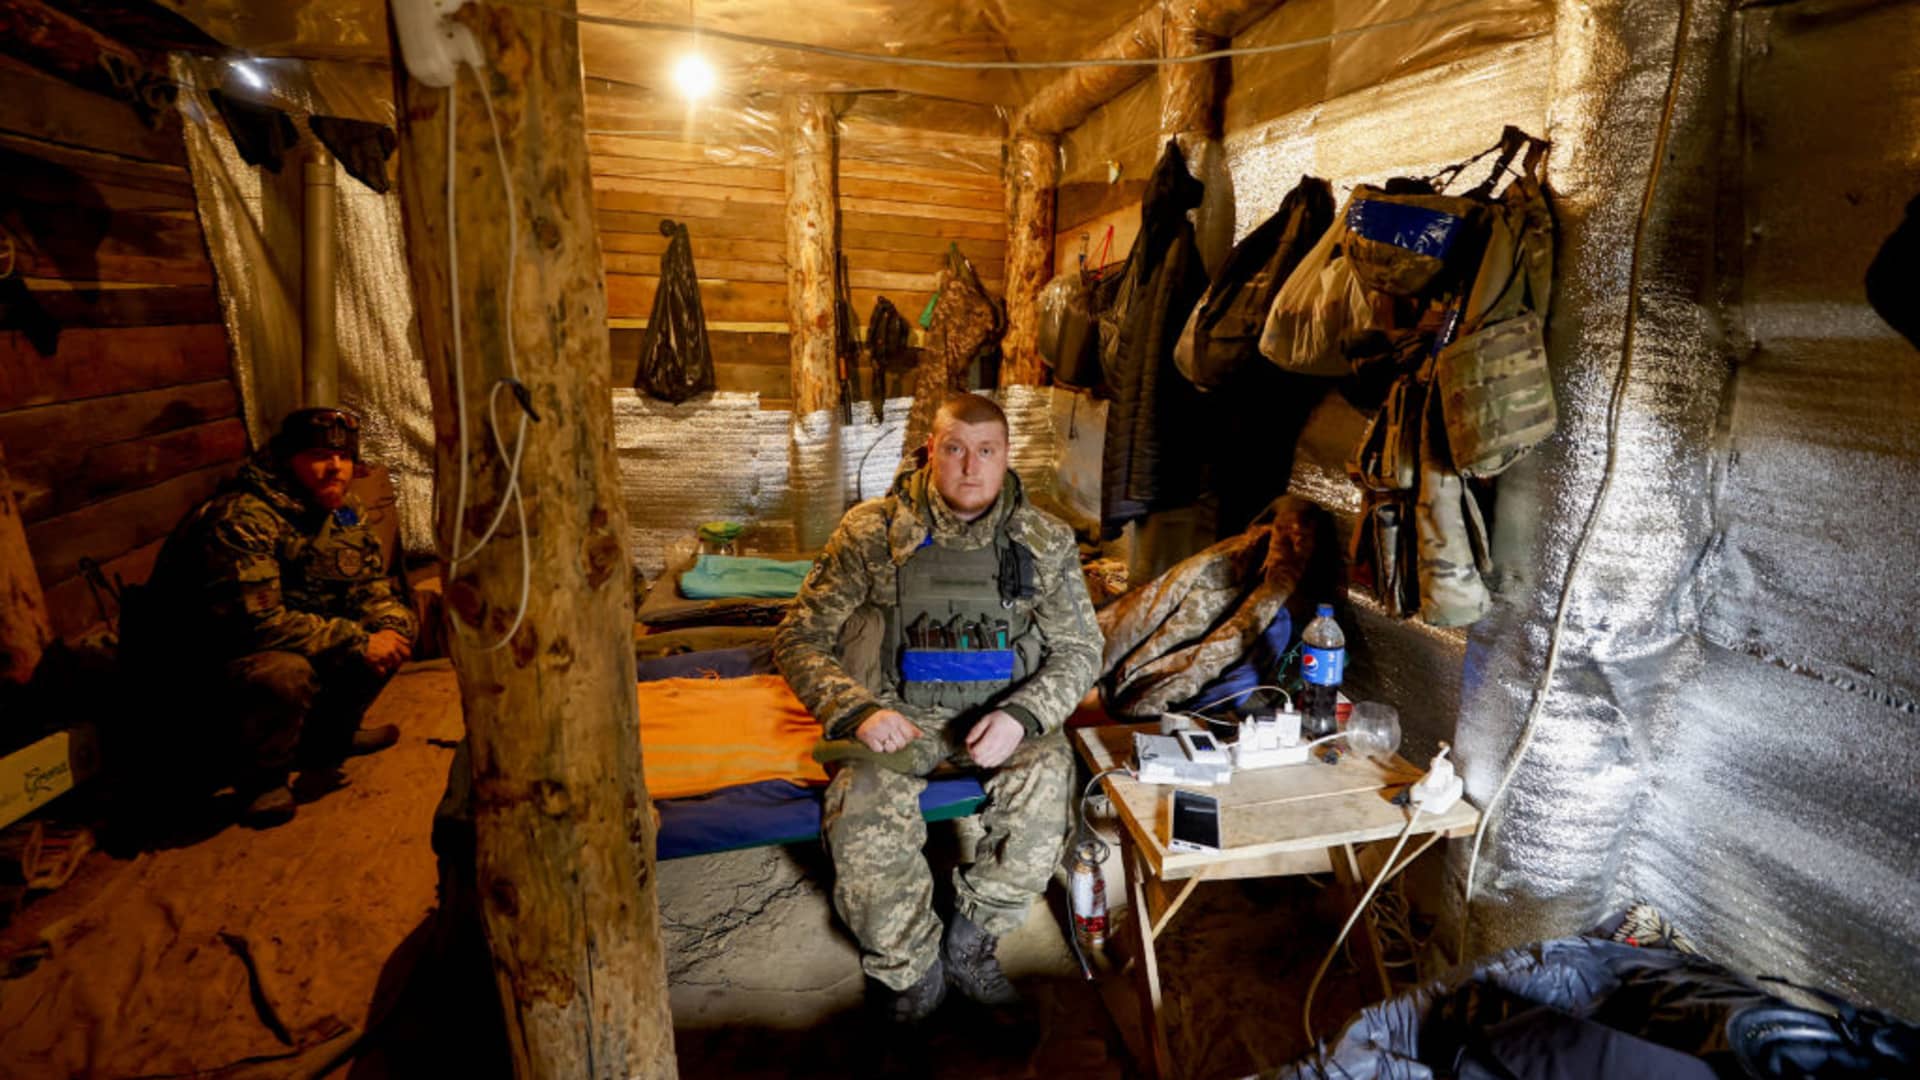 Soldiers stationed at the front of the 59th cavalry of the Ukrainian Army, who spent their time outside of their duties in the shelter, are viewed in Donetsk Oblast, Ukraine on Feb 27, 2023. 